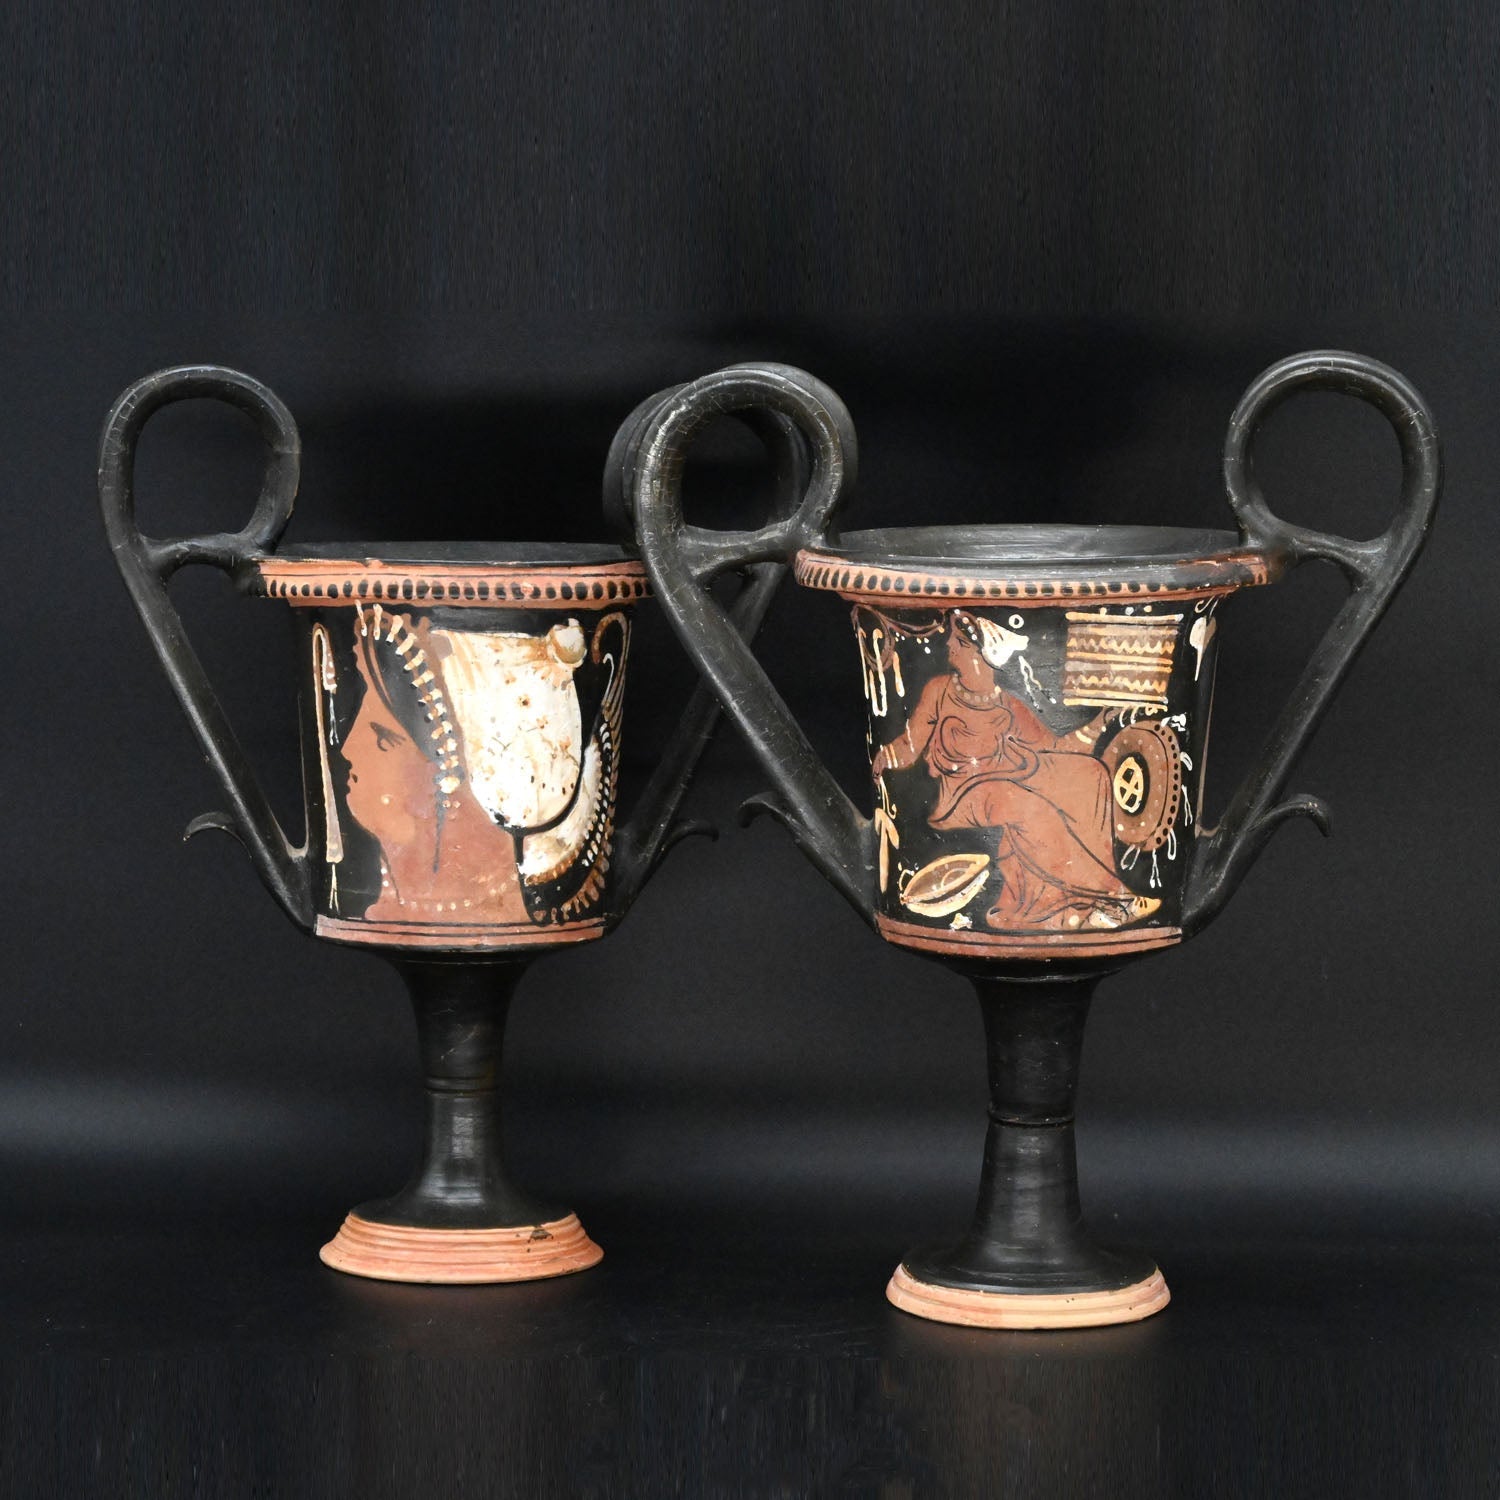 Two Apulian Red-Figure Kantharoi attributed to the White Sakkos Painter, <br><em>ca. 310 BCE</em>